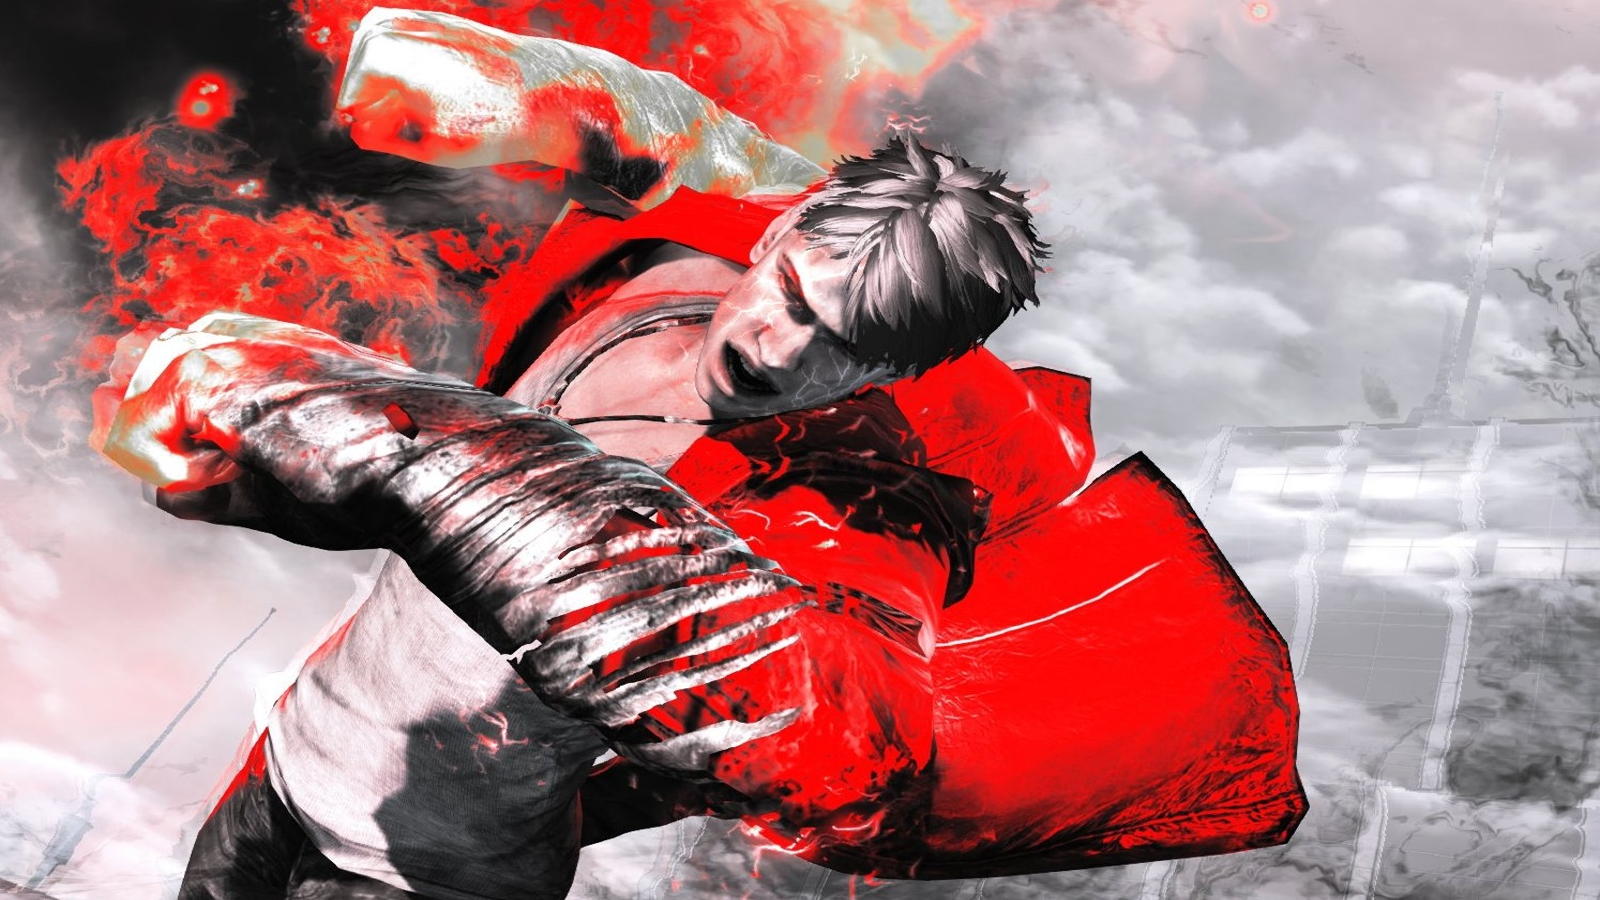 Devil May Cry 2 Review - Review - Nintendo World Report